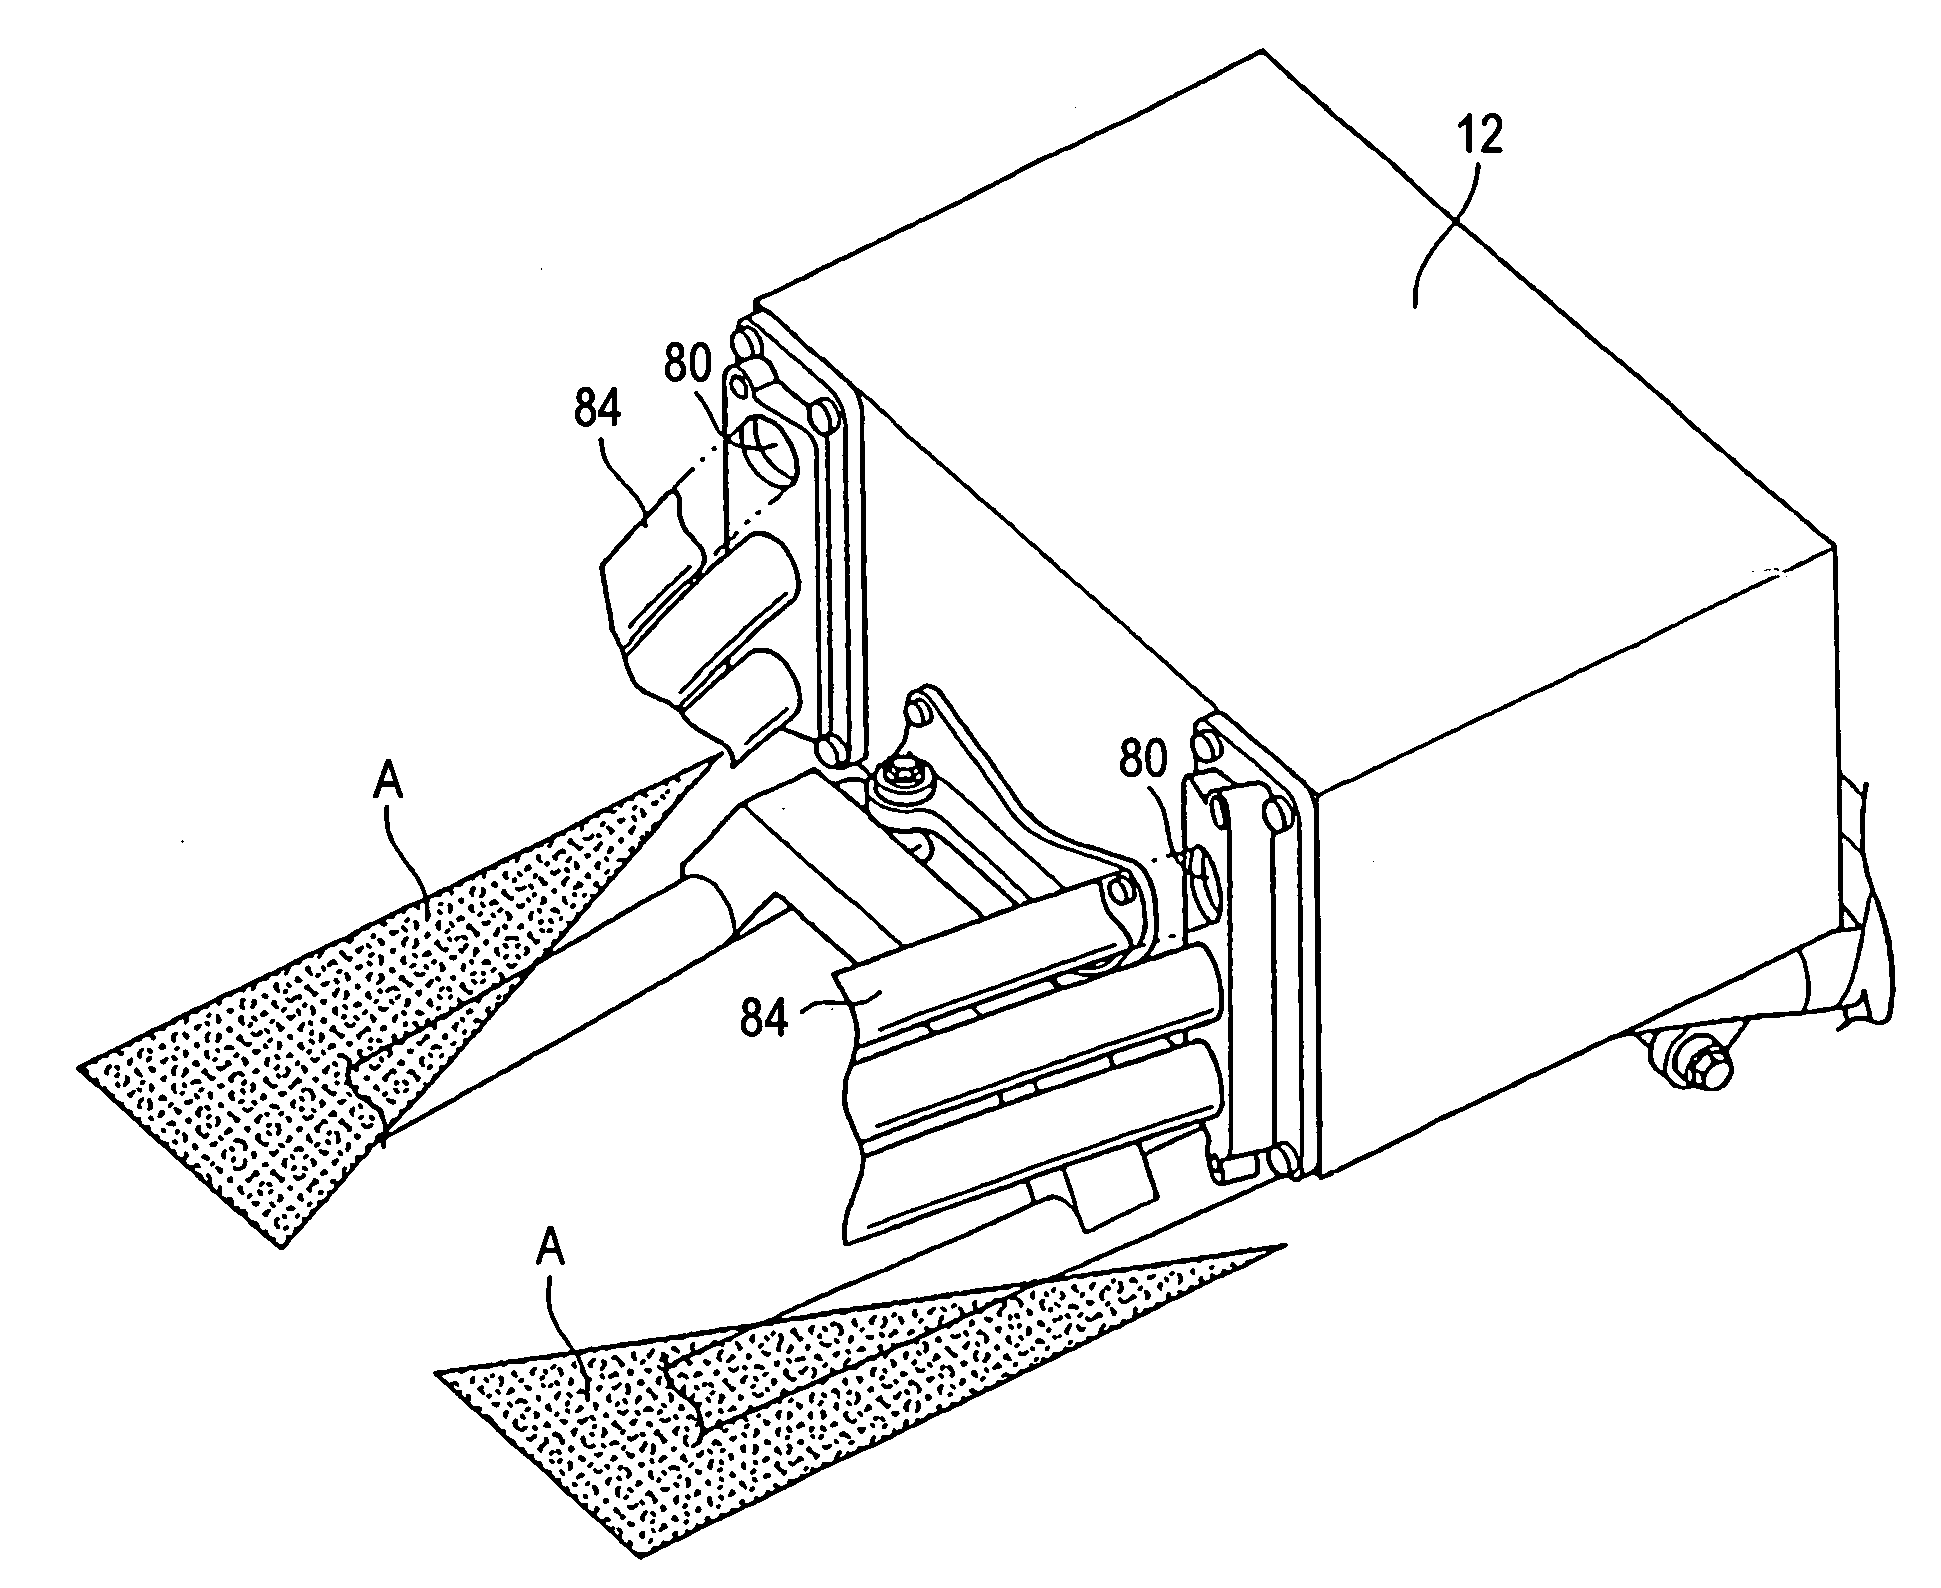 Motor cycle with fuel cell and stack structure of fuel cell